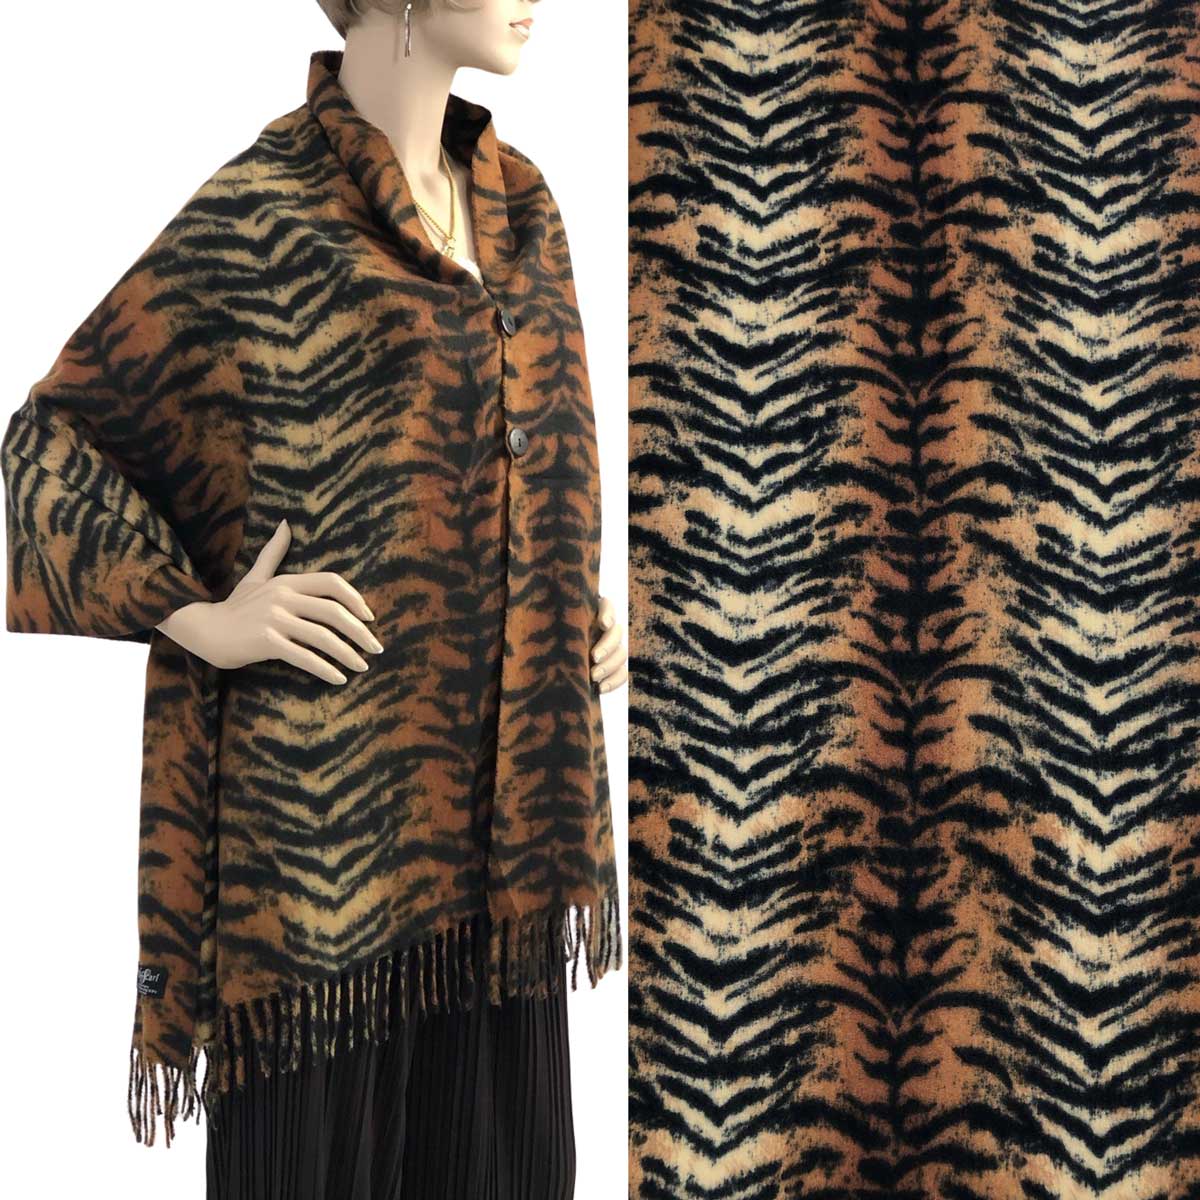 TIGER PRINT Suede Cloth Animal Print Shawl with Buttons 